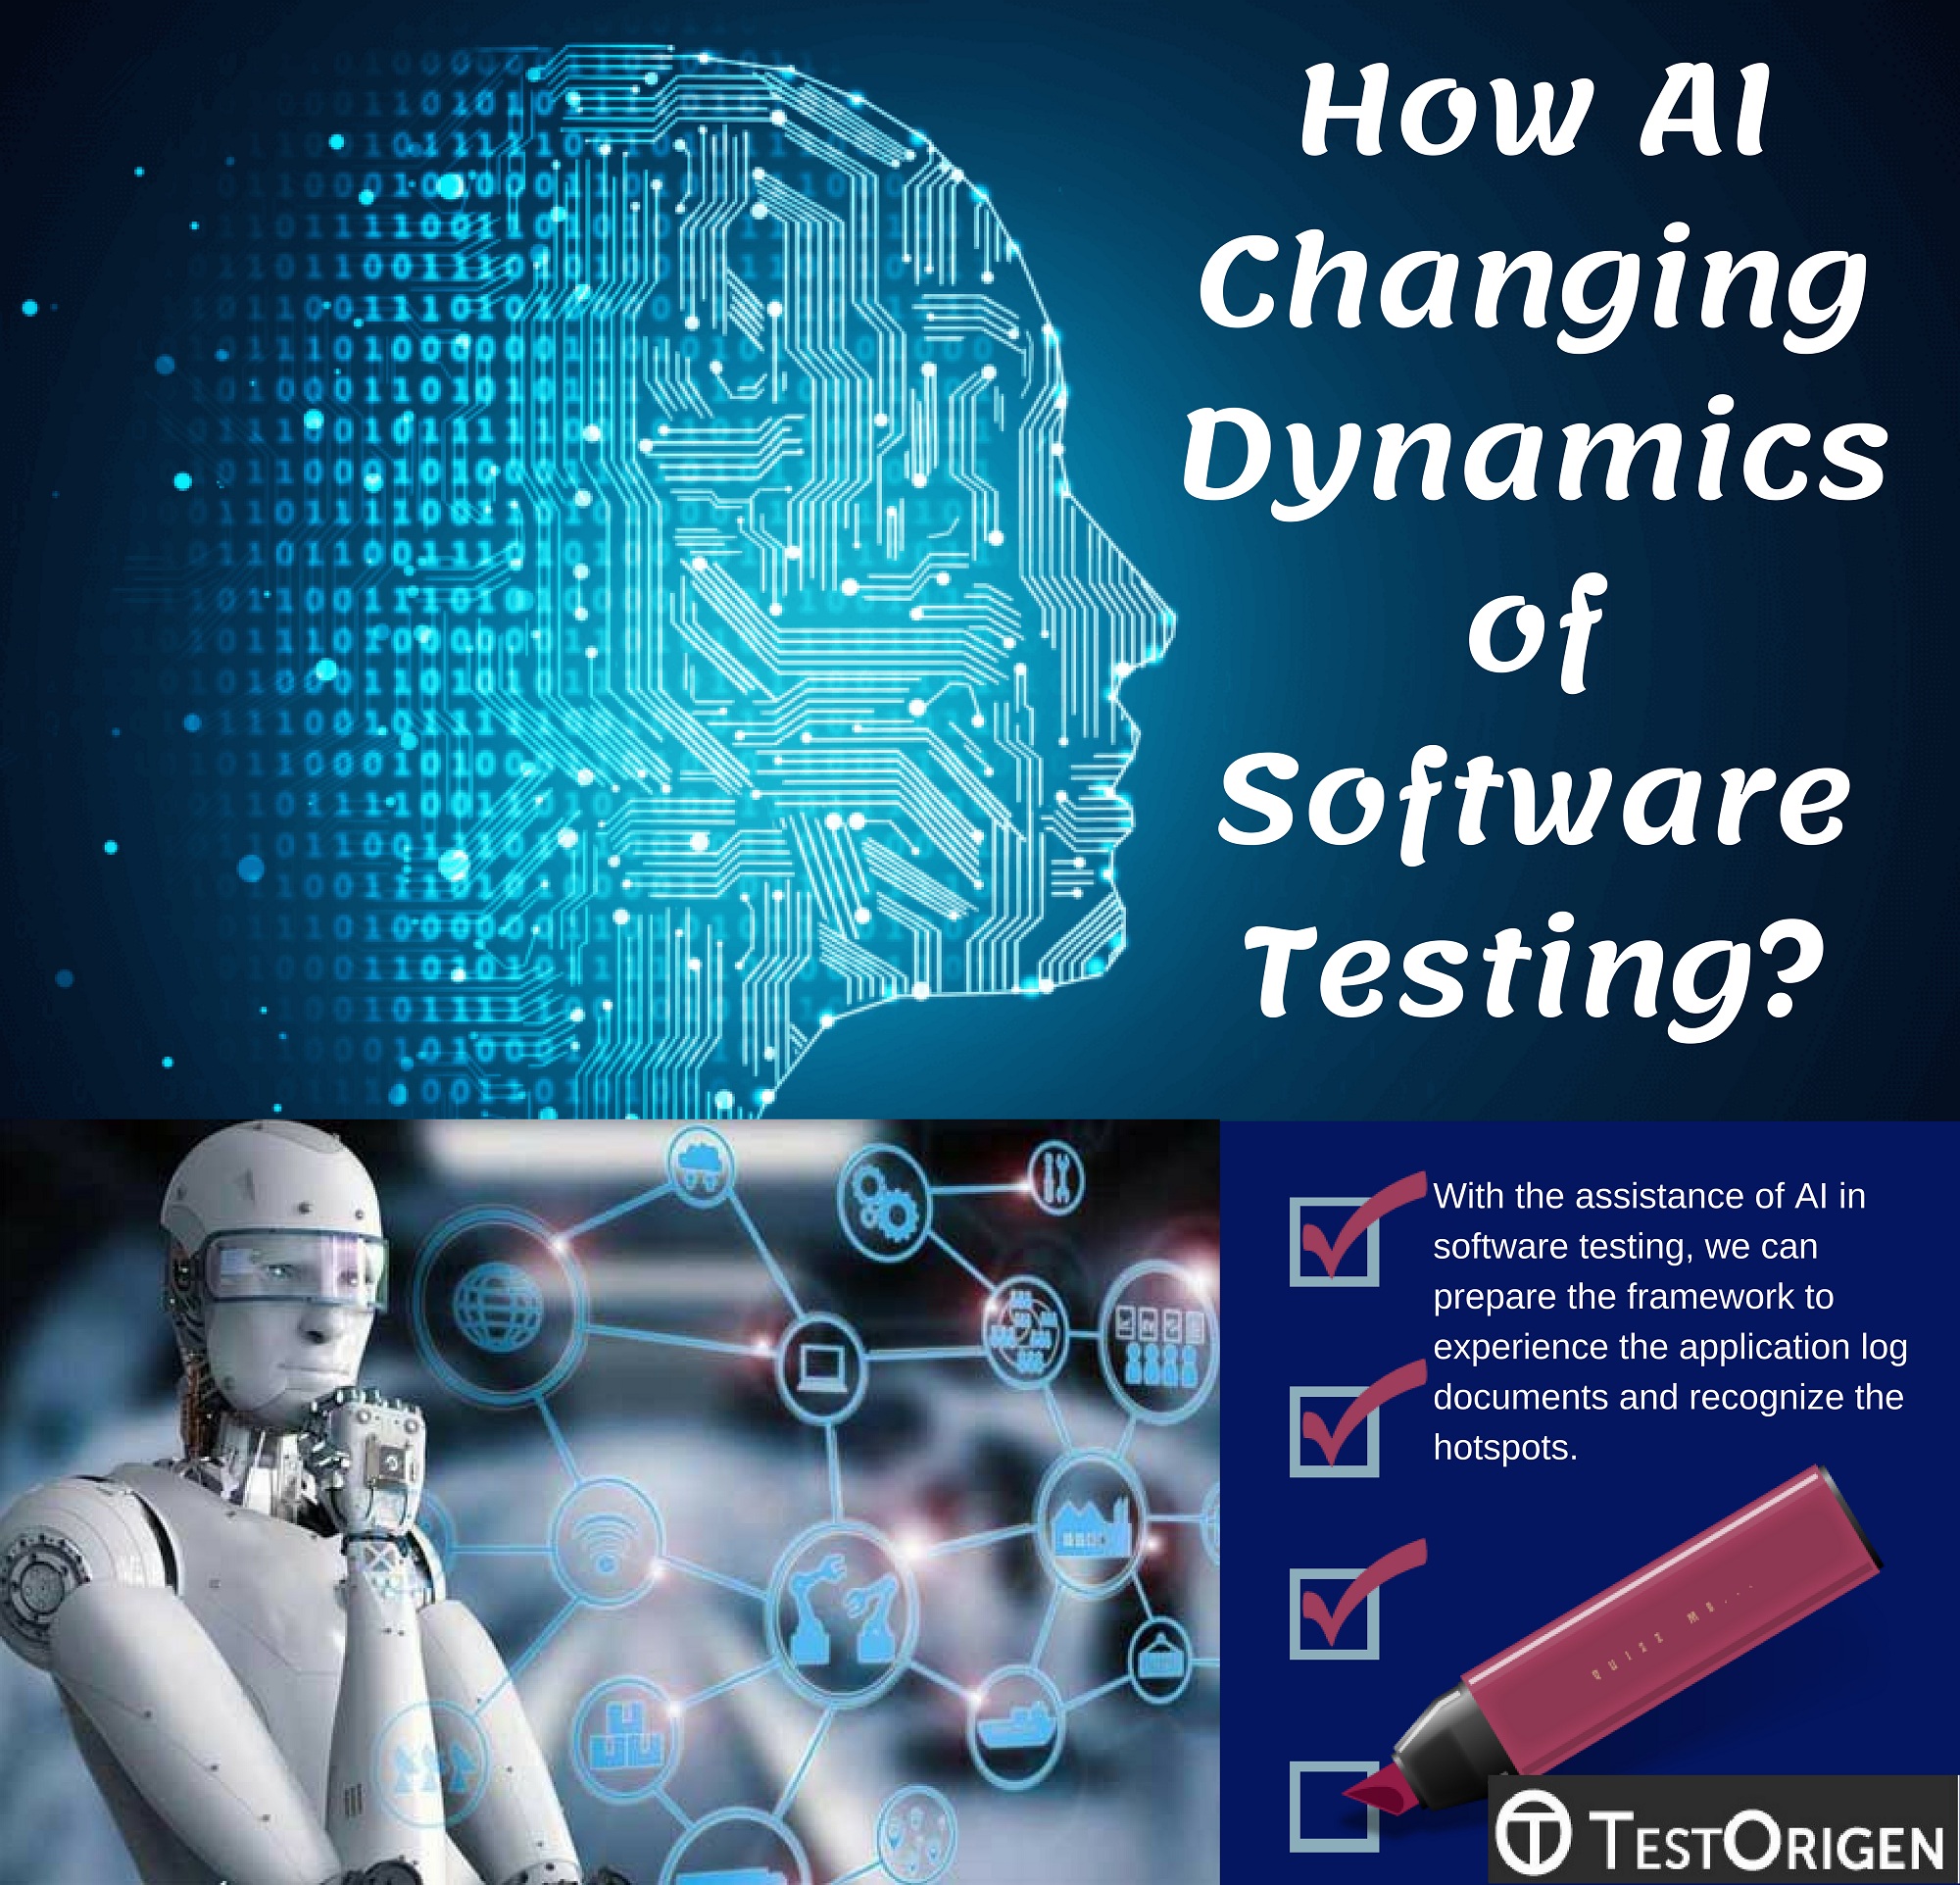 How AI Changing Dynamics of Software Testing?